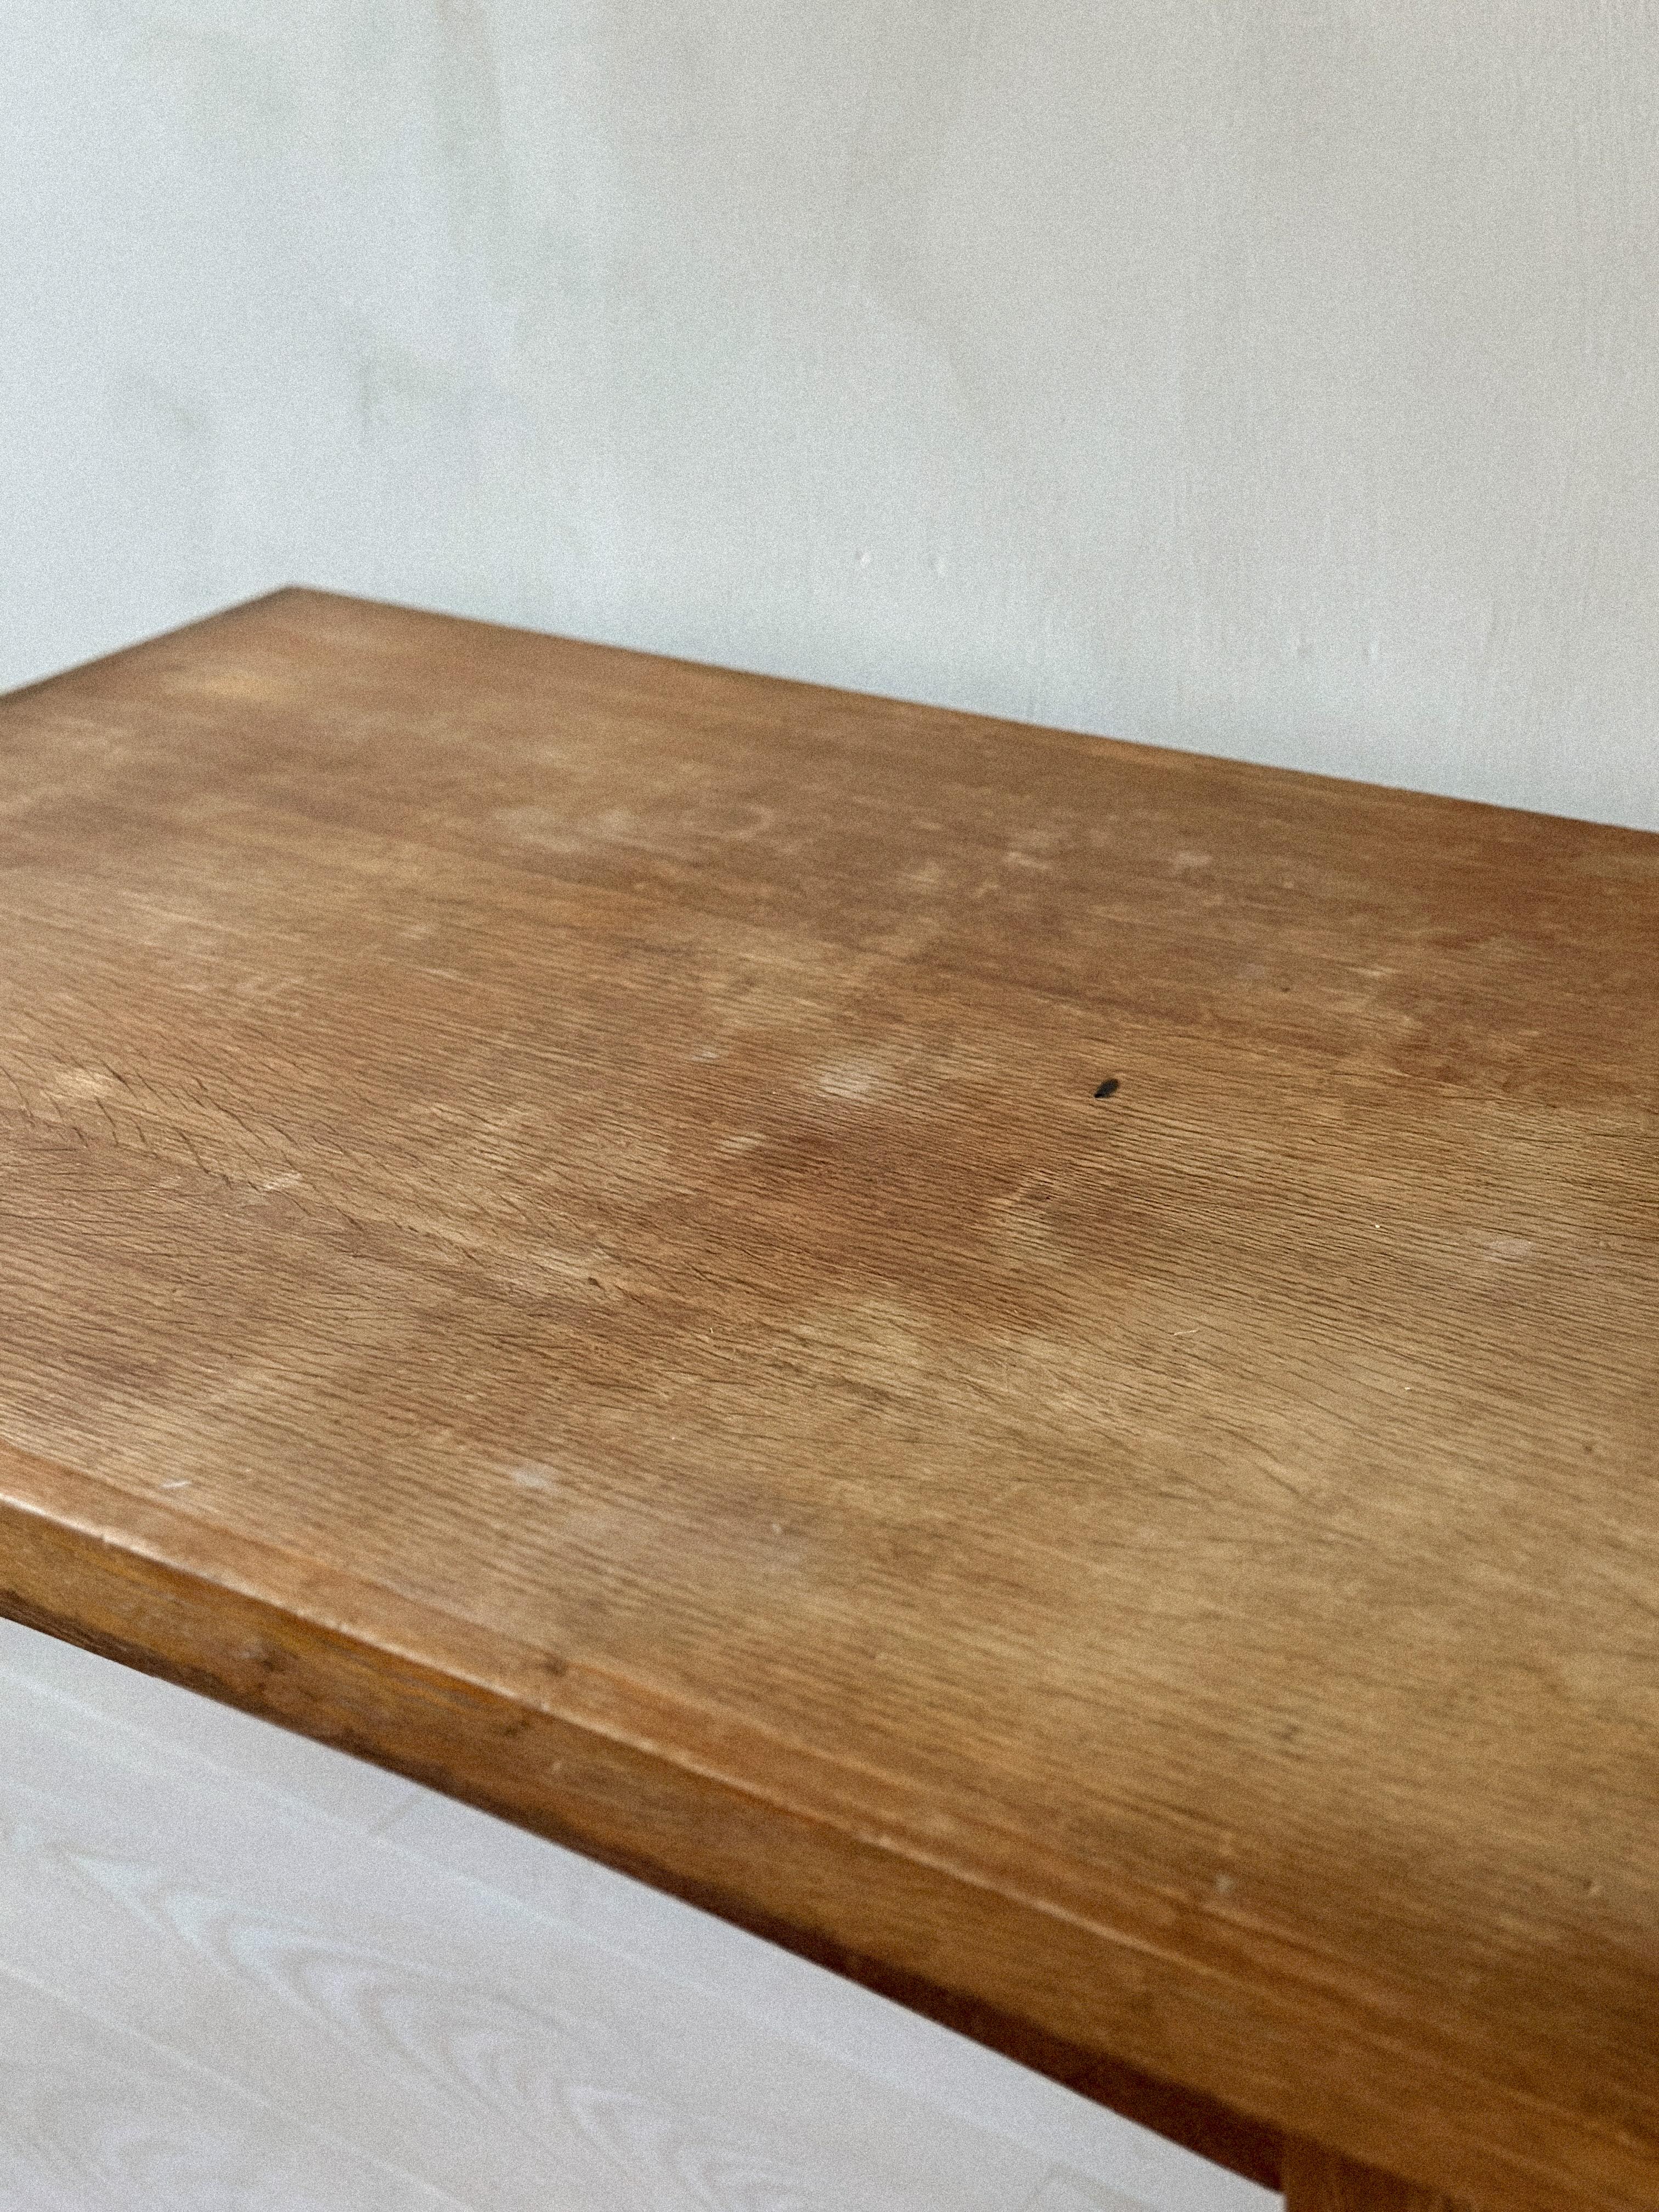 Vintage French Oak Dining Table in Style of Pierre Jeanneret, France, 1950s For Sale 1